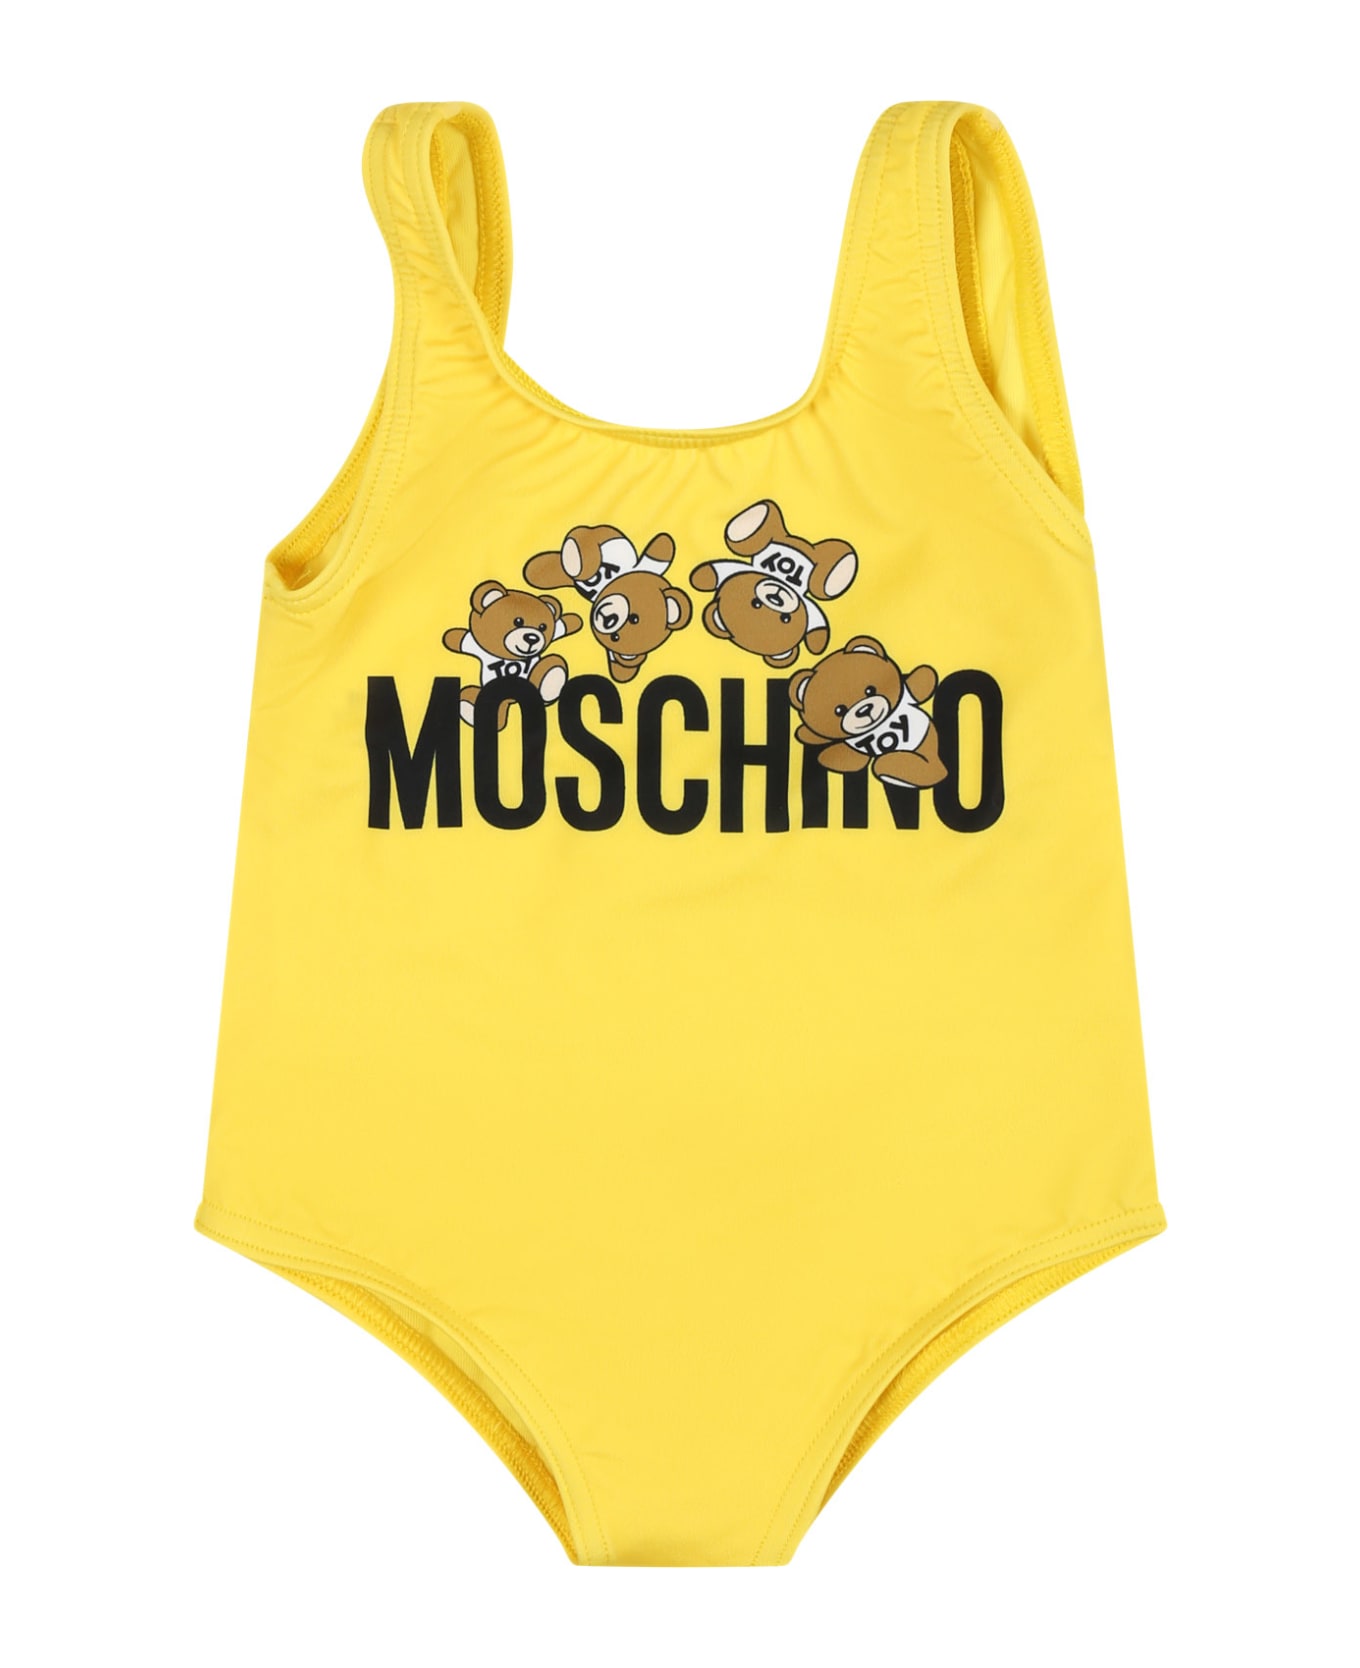 Moschino Yellow One-piece Swimsuit For Baby Girl With Logo And Teddy Bear - Yellow 水着